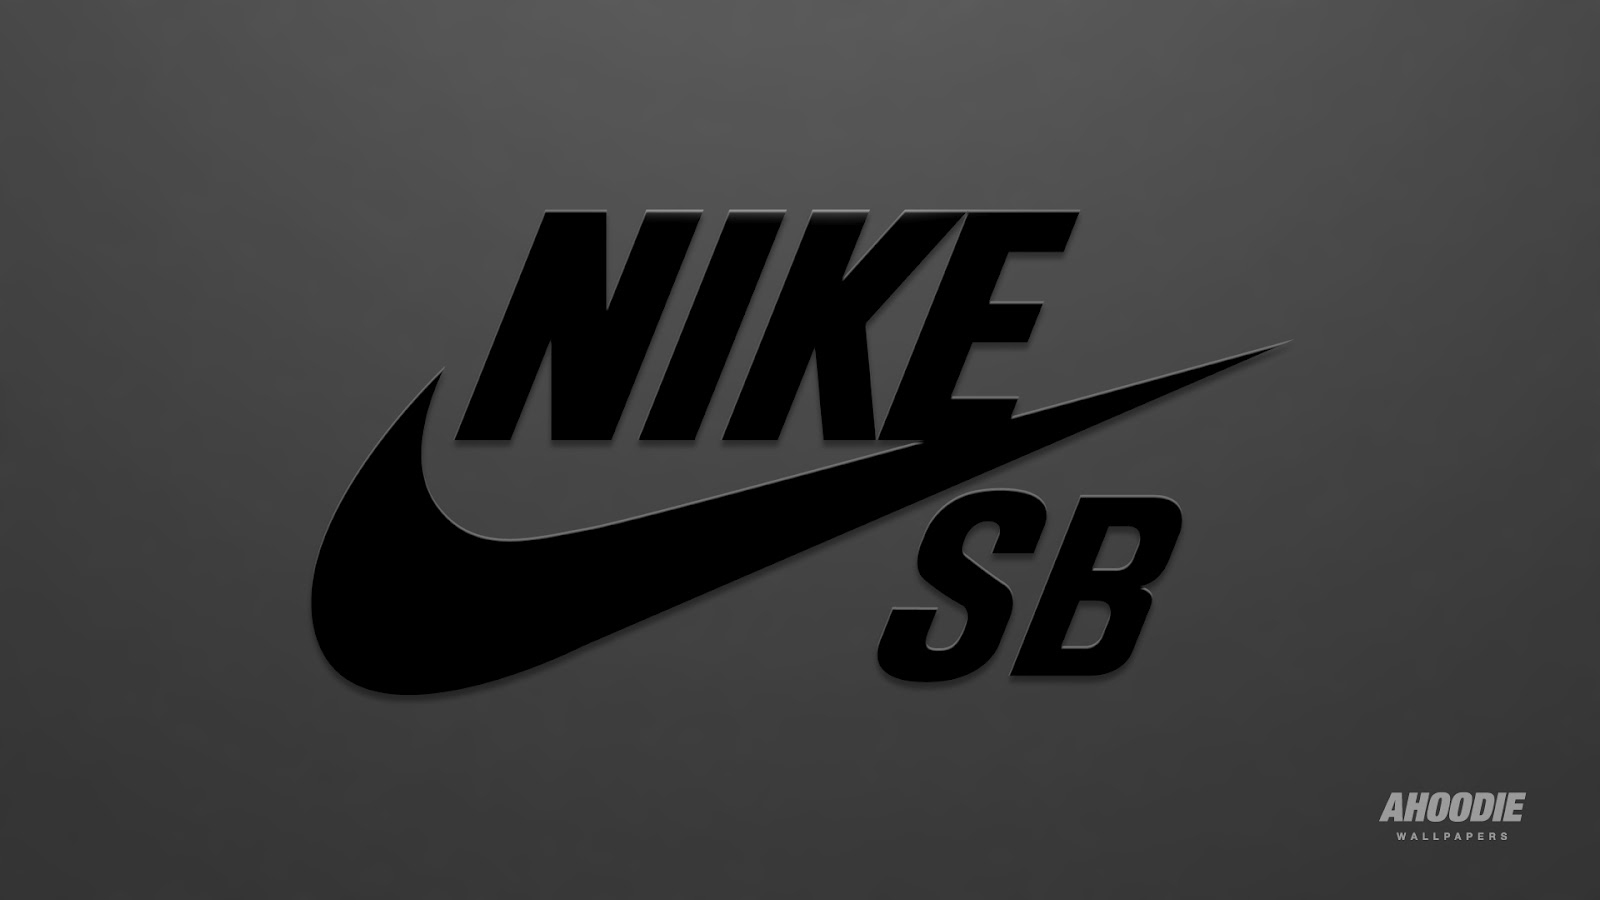 By Nike Sb On Go Skateboarding Day The Team Showed